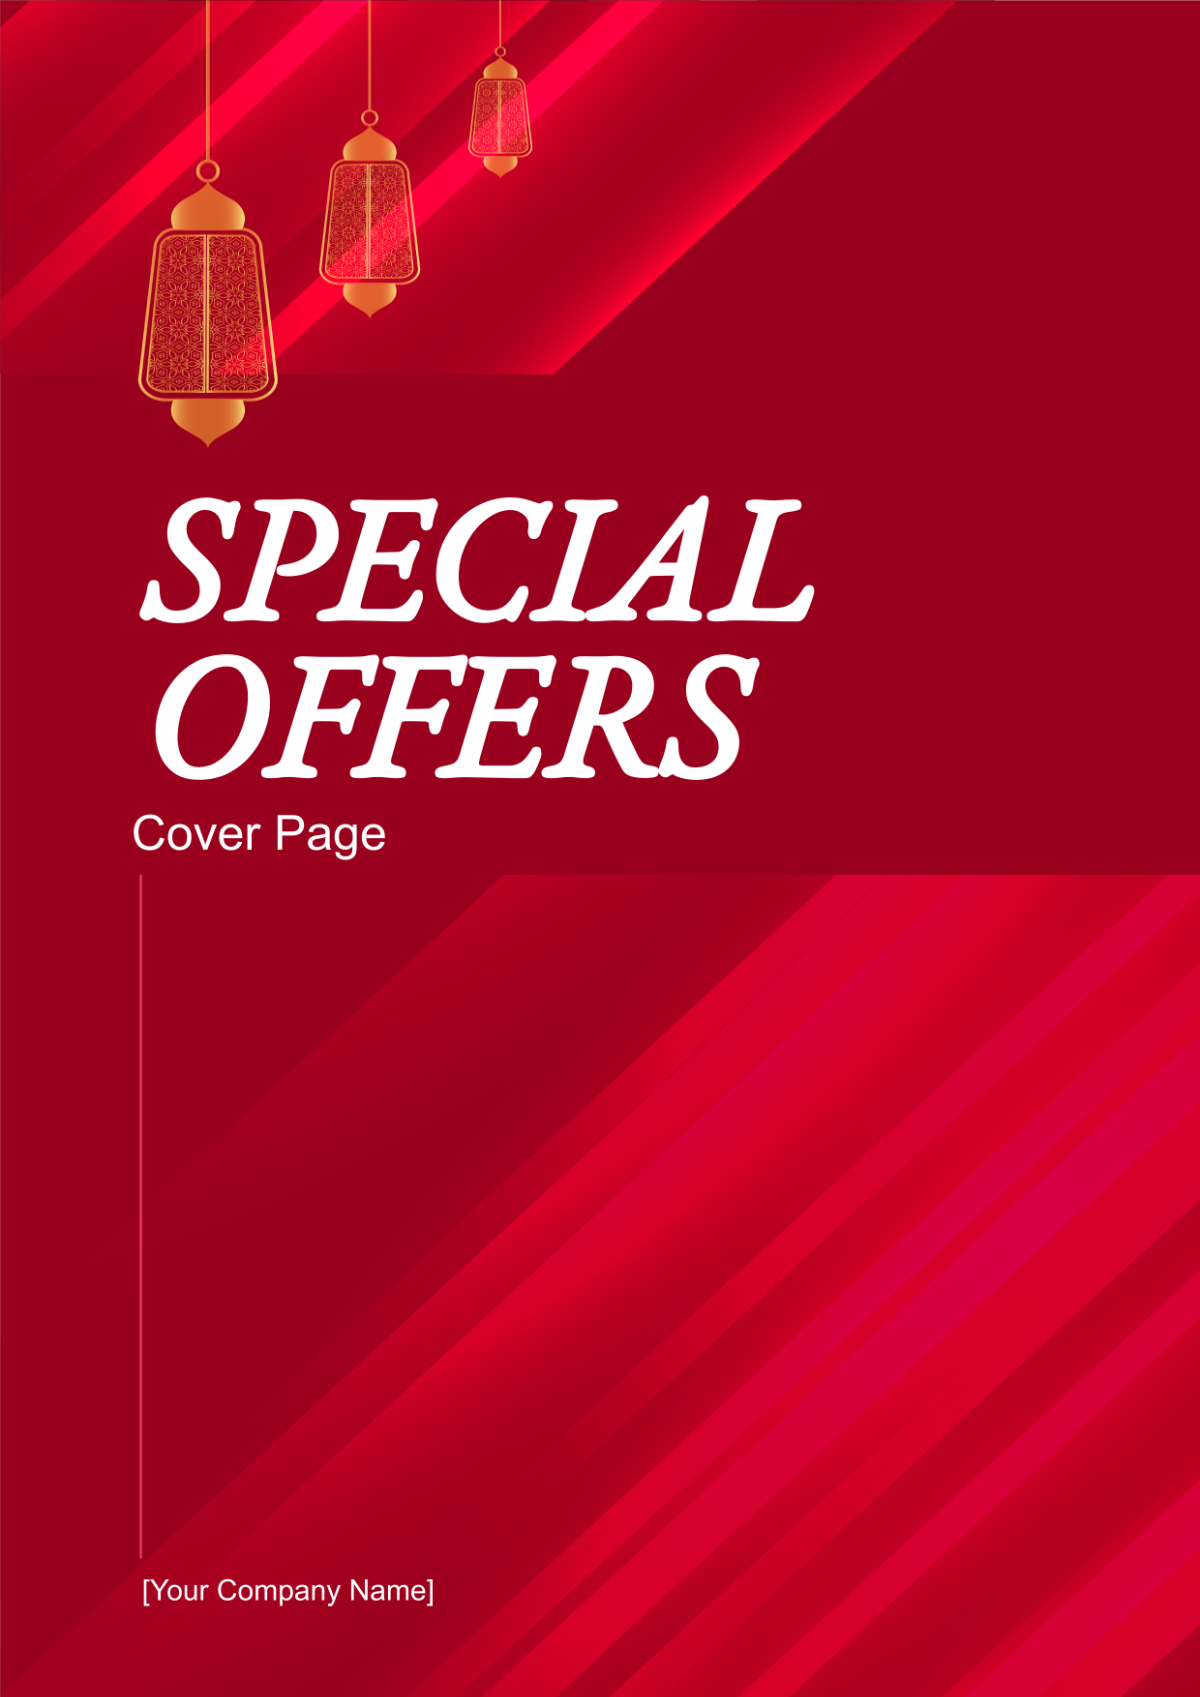 Special Offers Cover Page Template